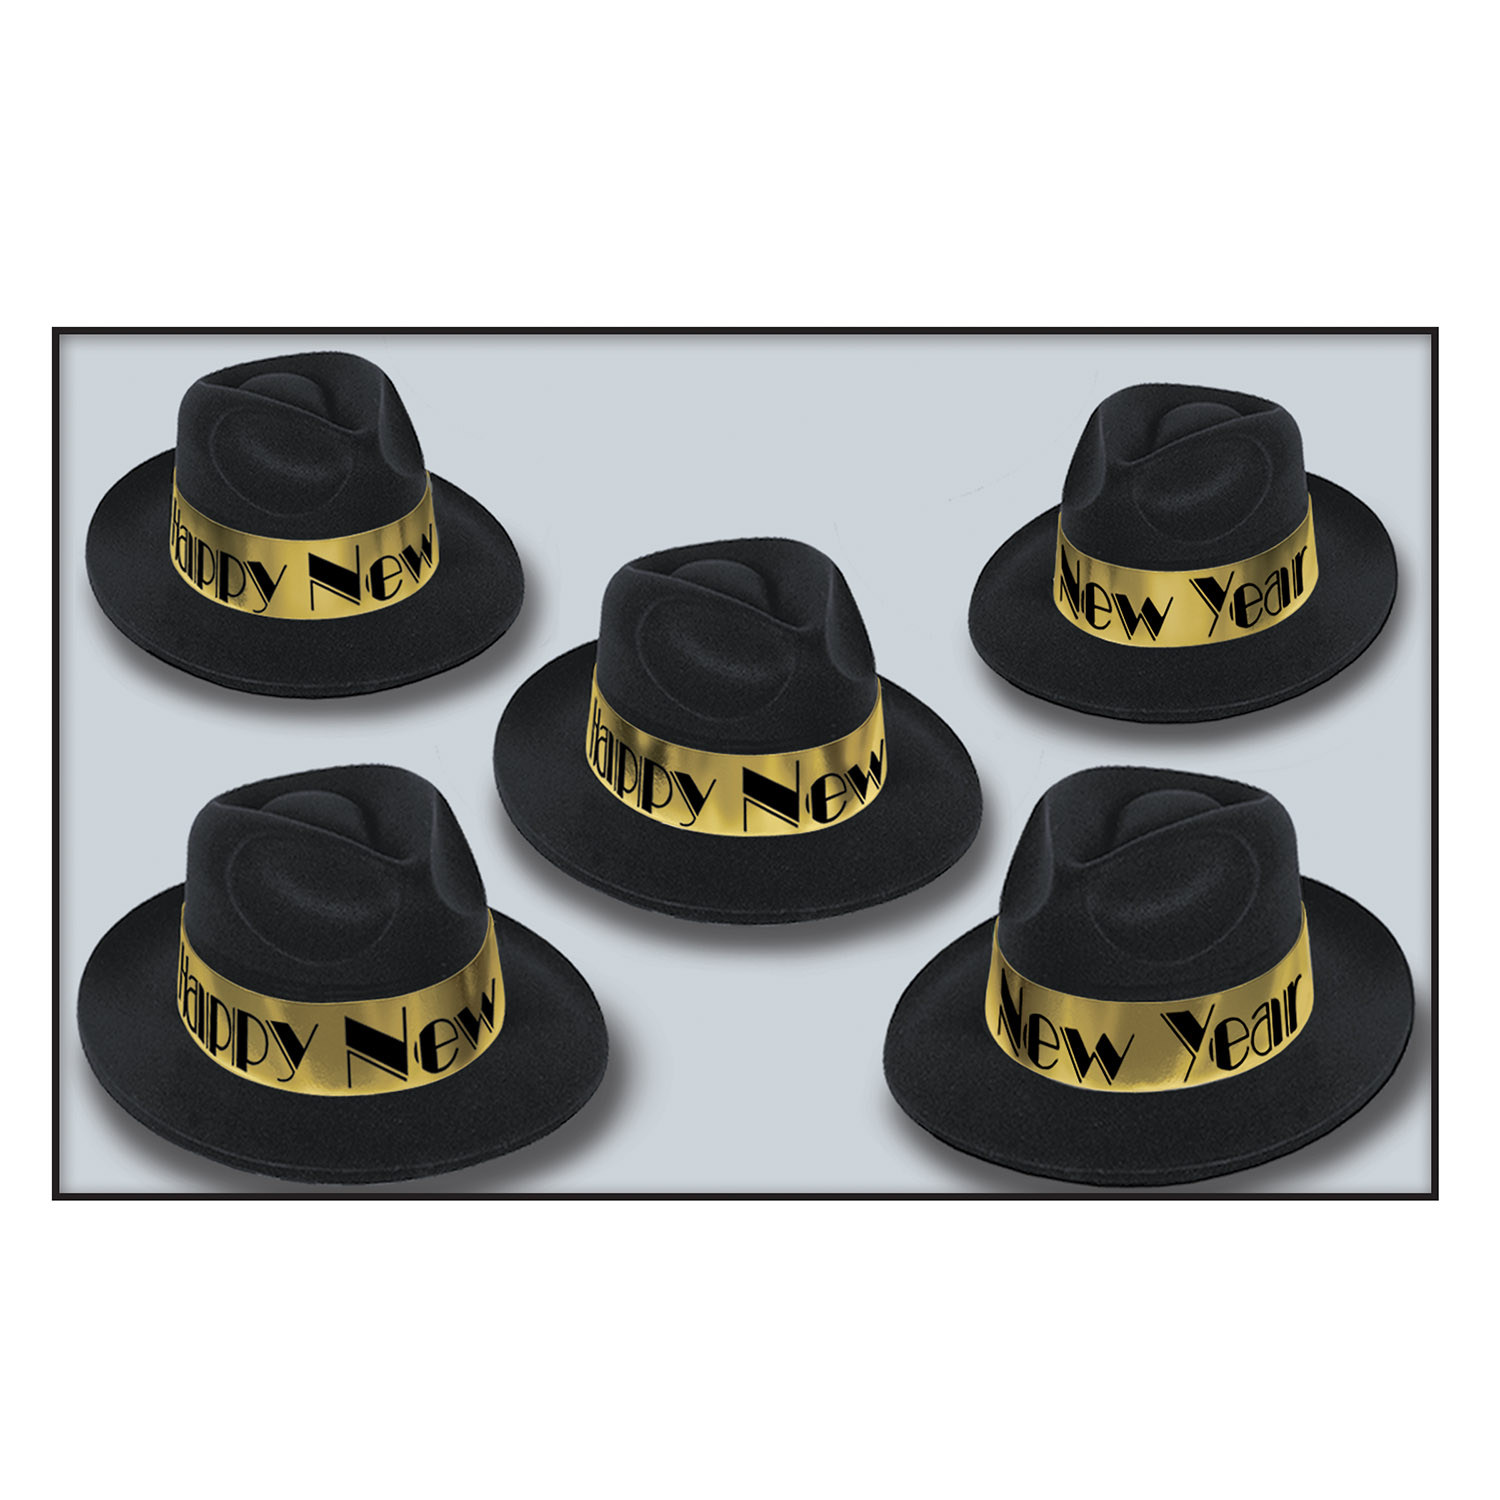 Black plastic fedora with velour coating and a gold band that reads "Happy New Year" in black.